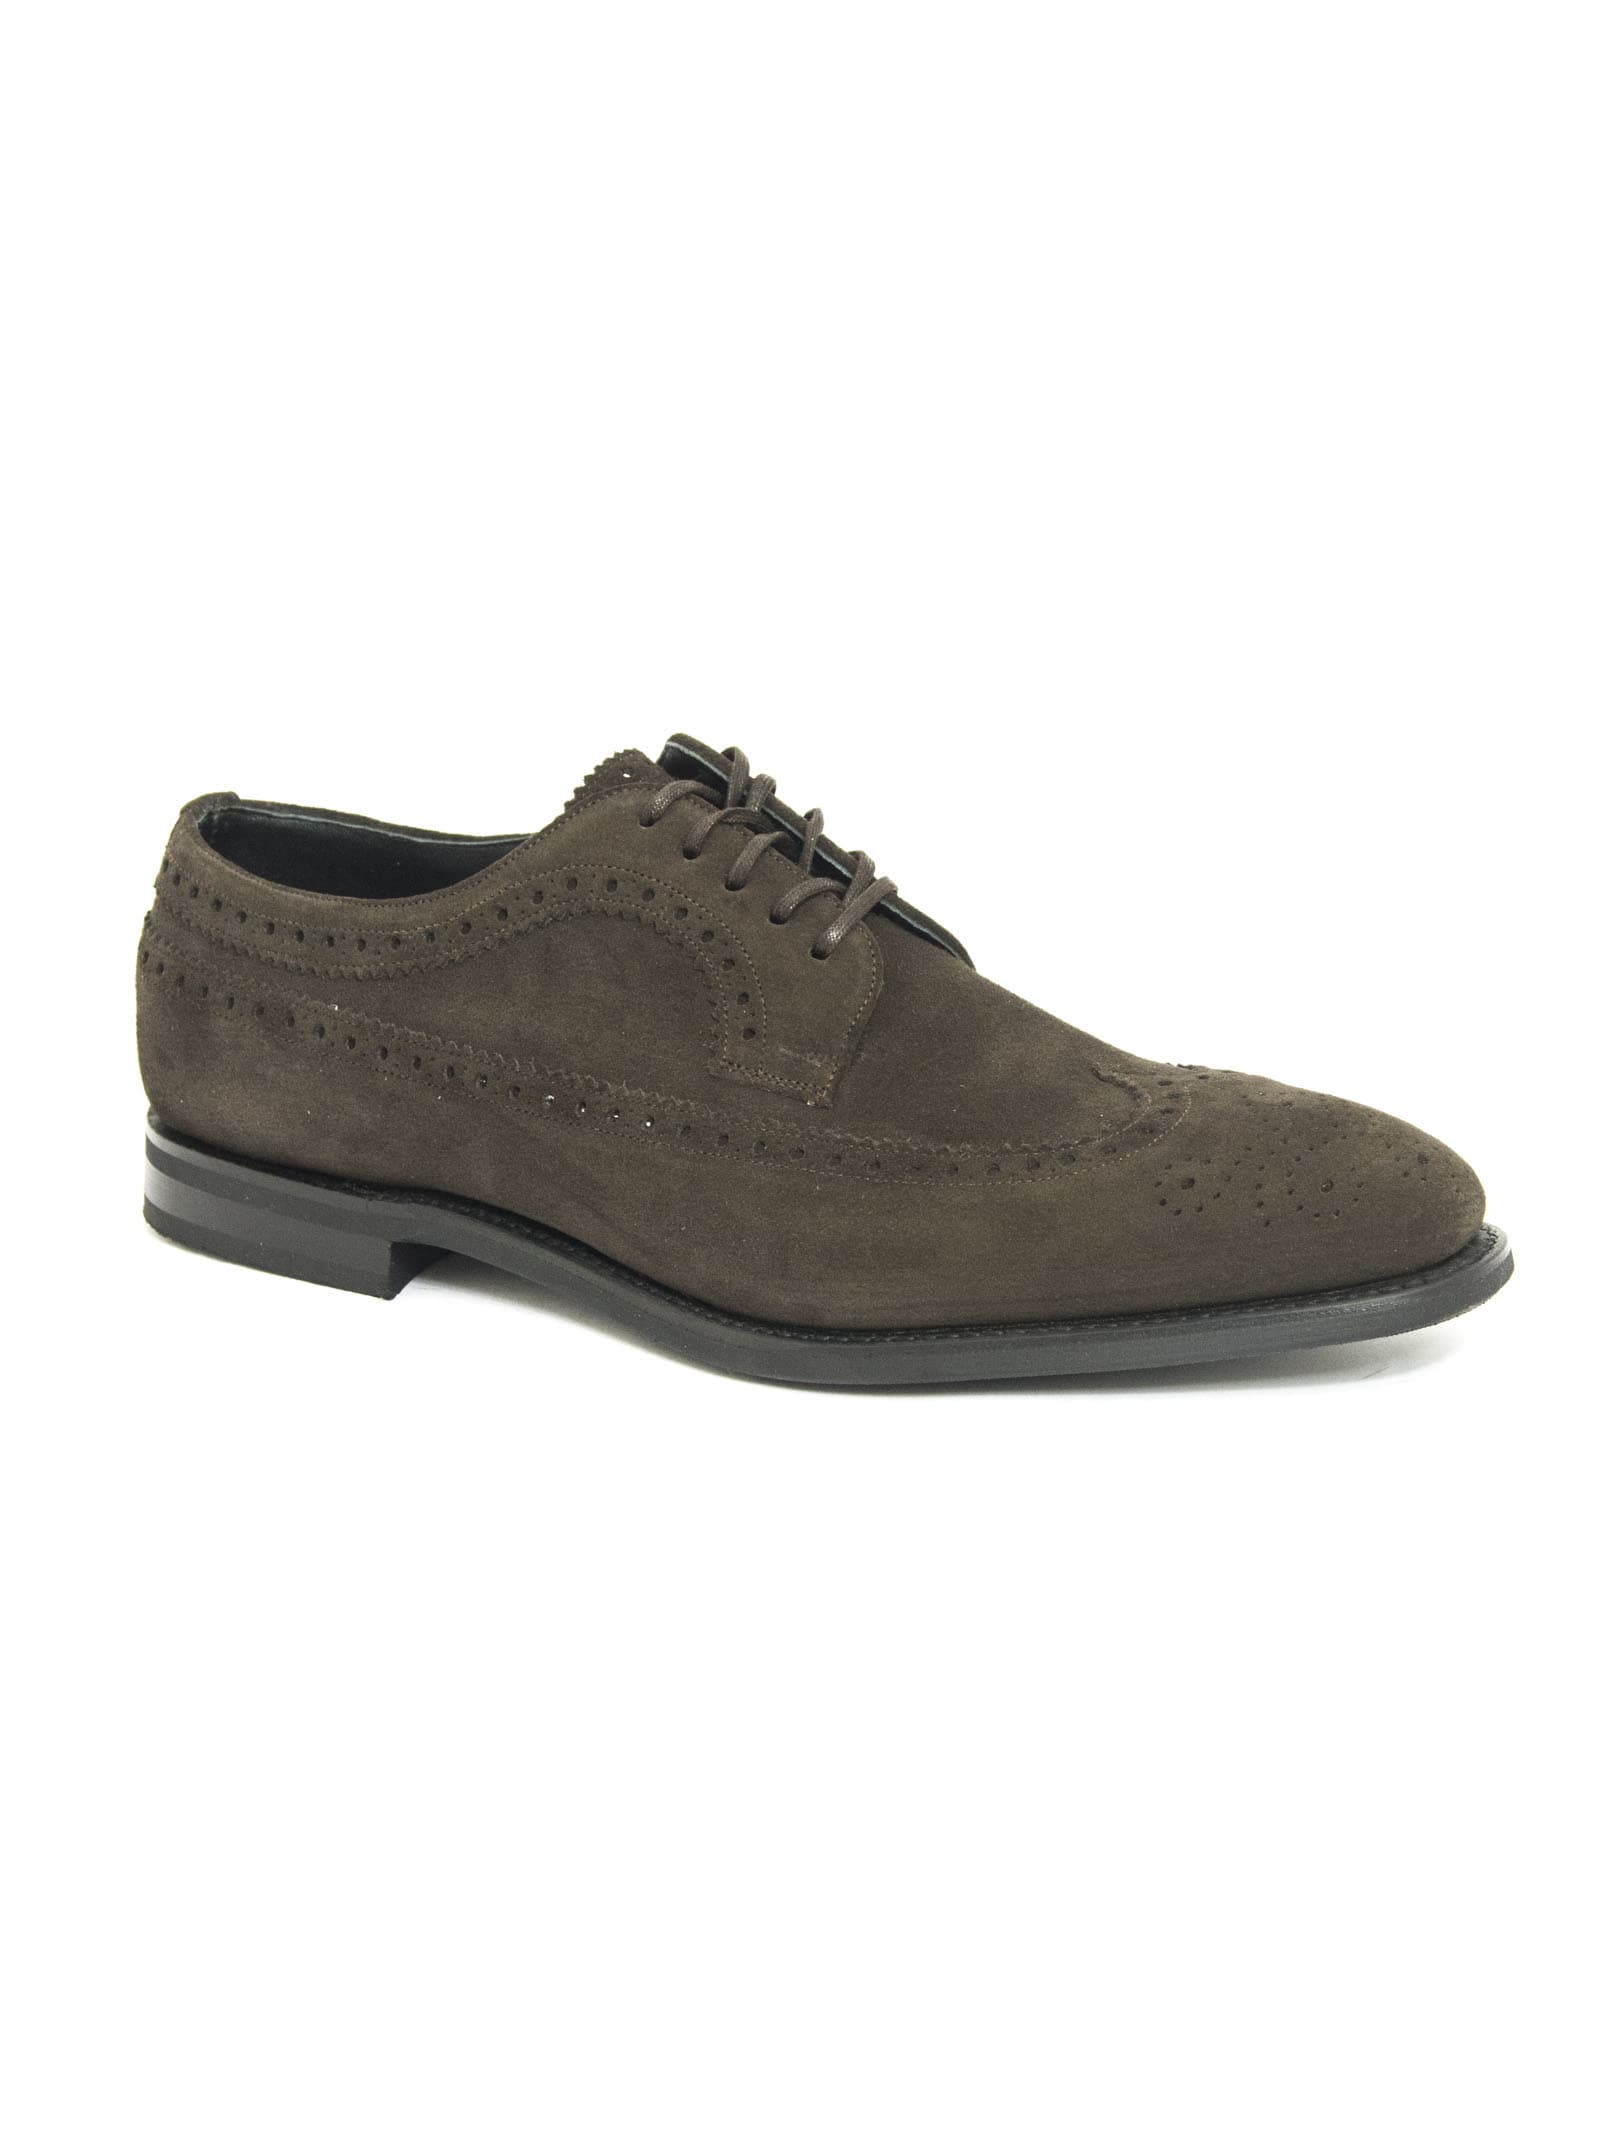 Church's Laced Shoes | italist, ALWAYS LIKE A SALE